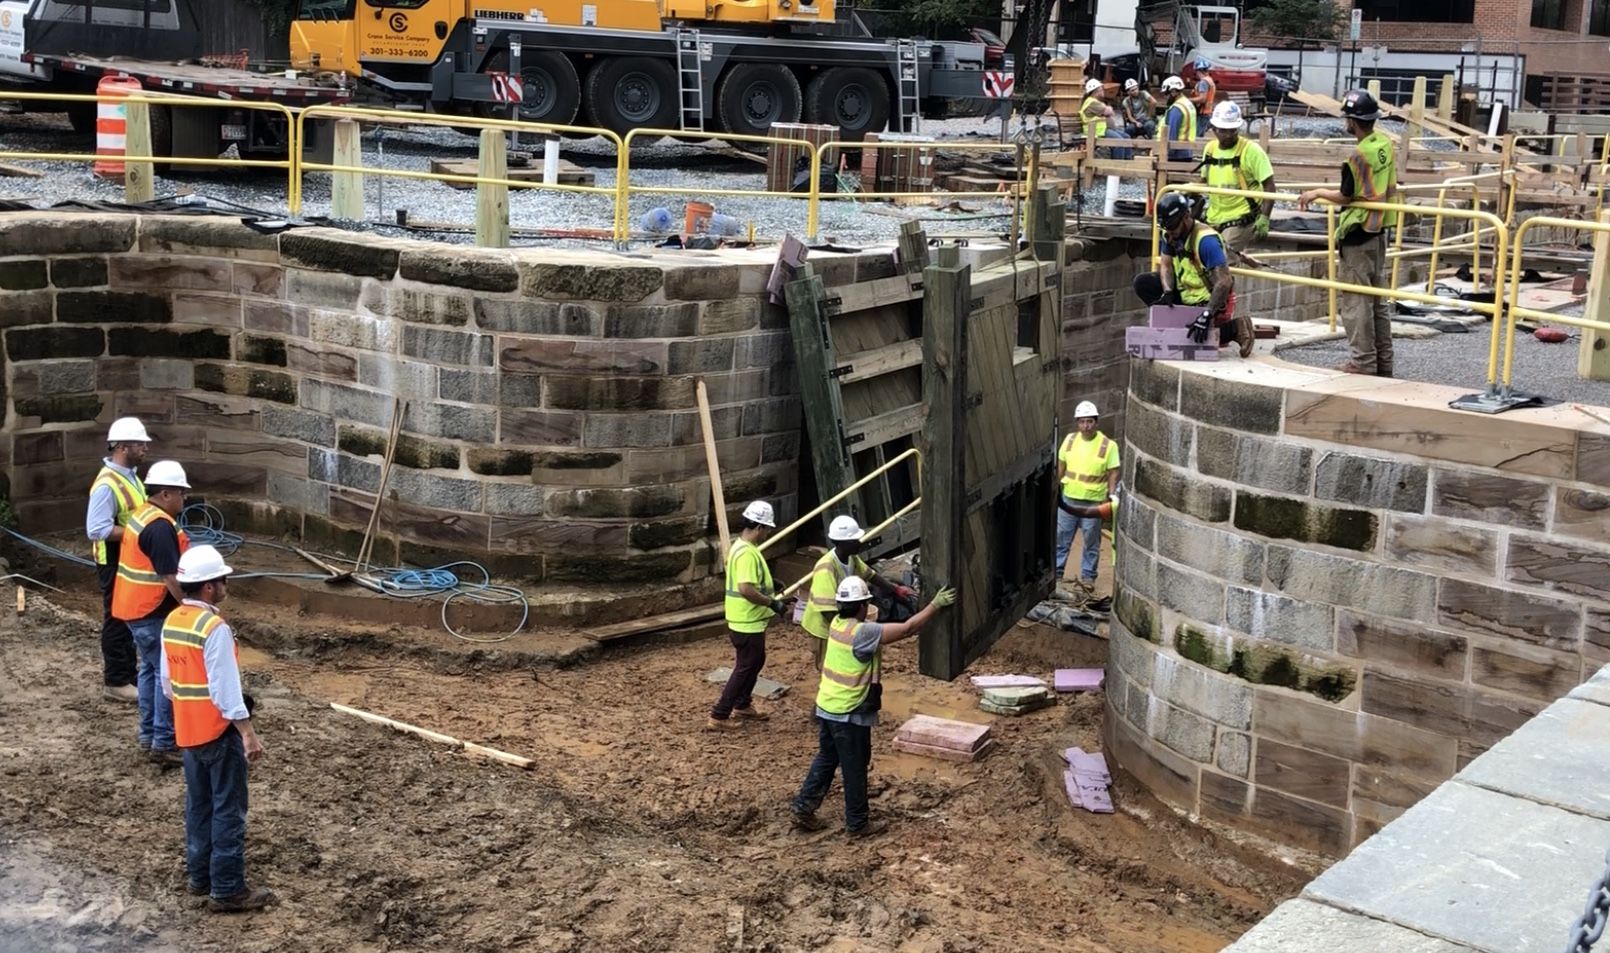 Reconstructed lock gates are being added to locks 3 and 4 in Georgetown between 30th and 31st streets, south of M Street in Northwest D.C. (WTOP/Kristi King)